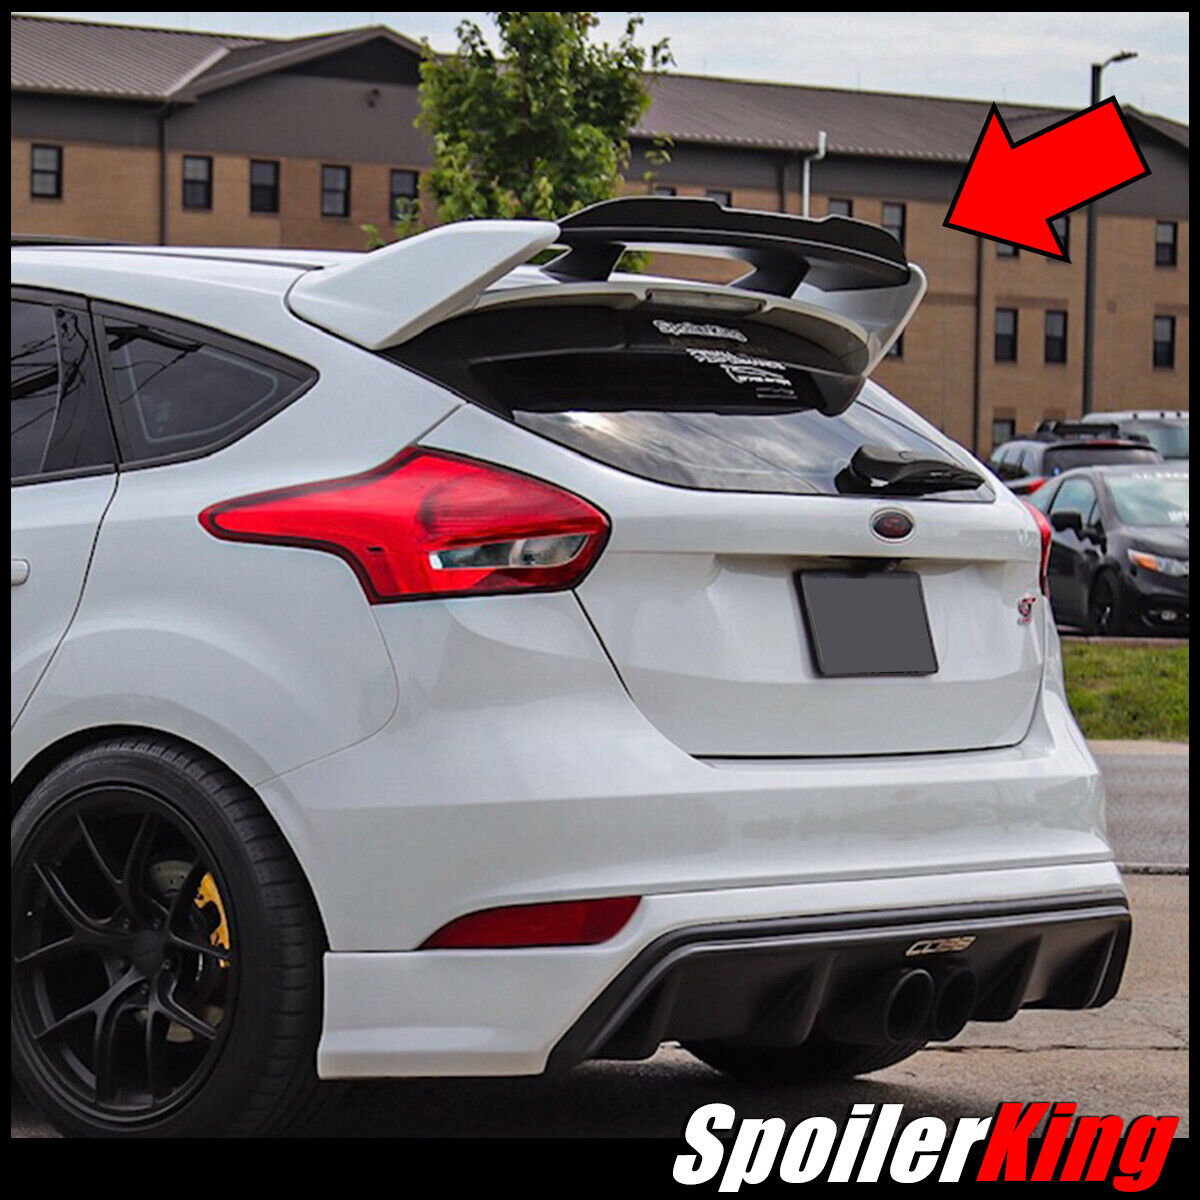 SpoilerKing Add-on Rear Roof Lip Spoiler 284GC Fits: Ford Focus 2015-18 RS only